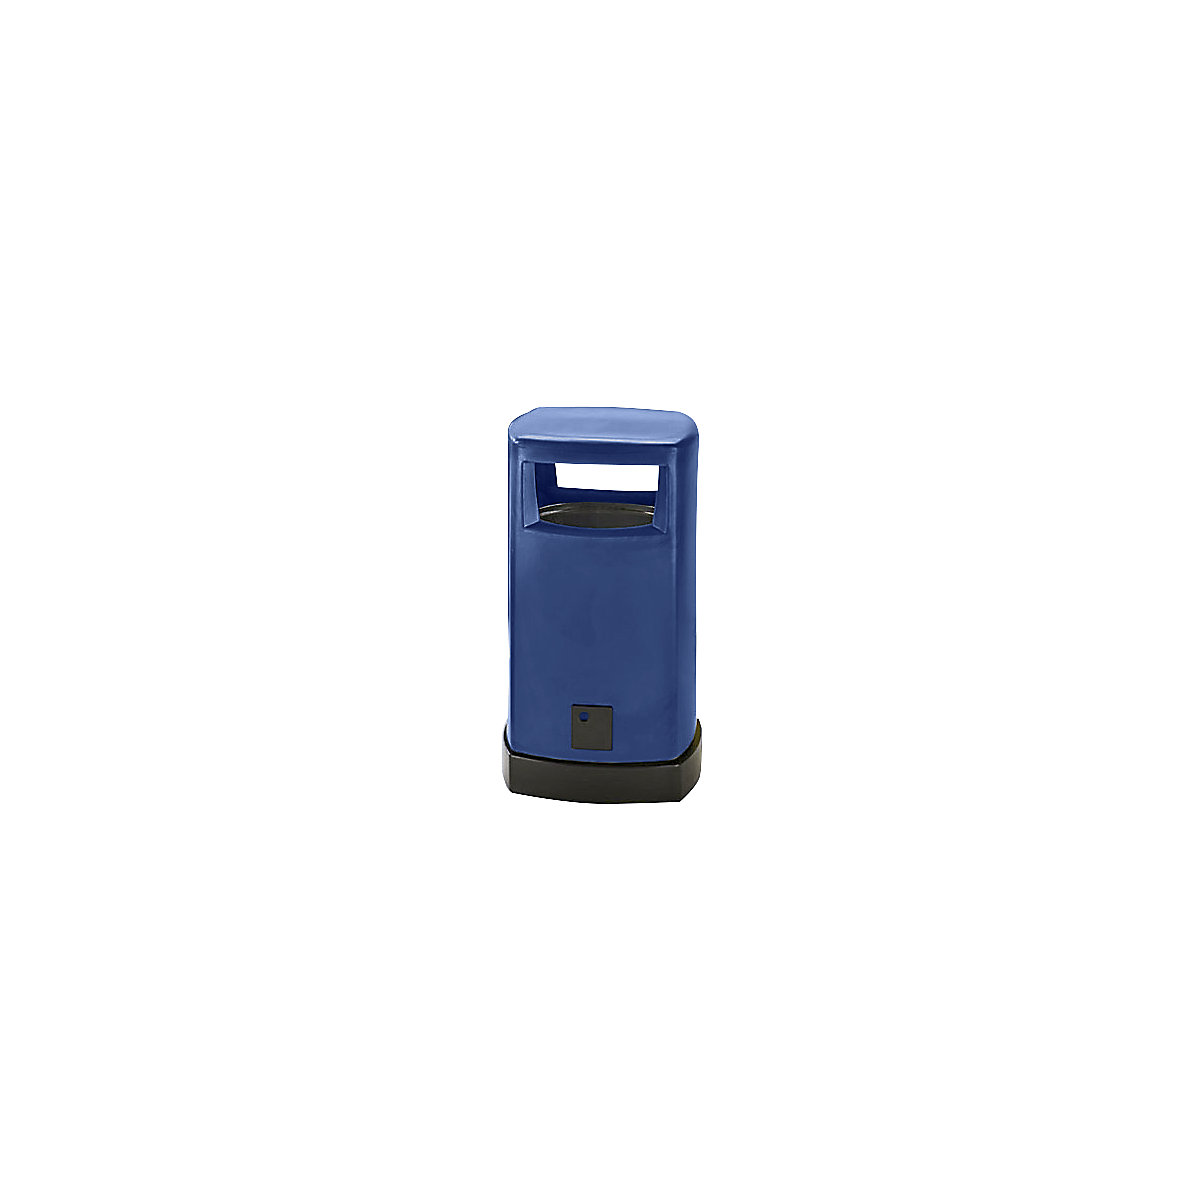 Plastic waste collector for outdoor use